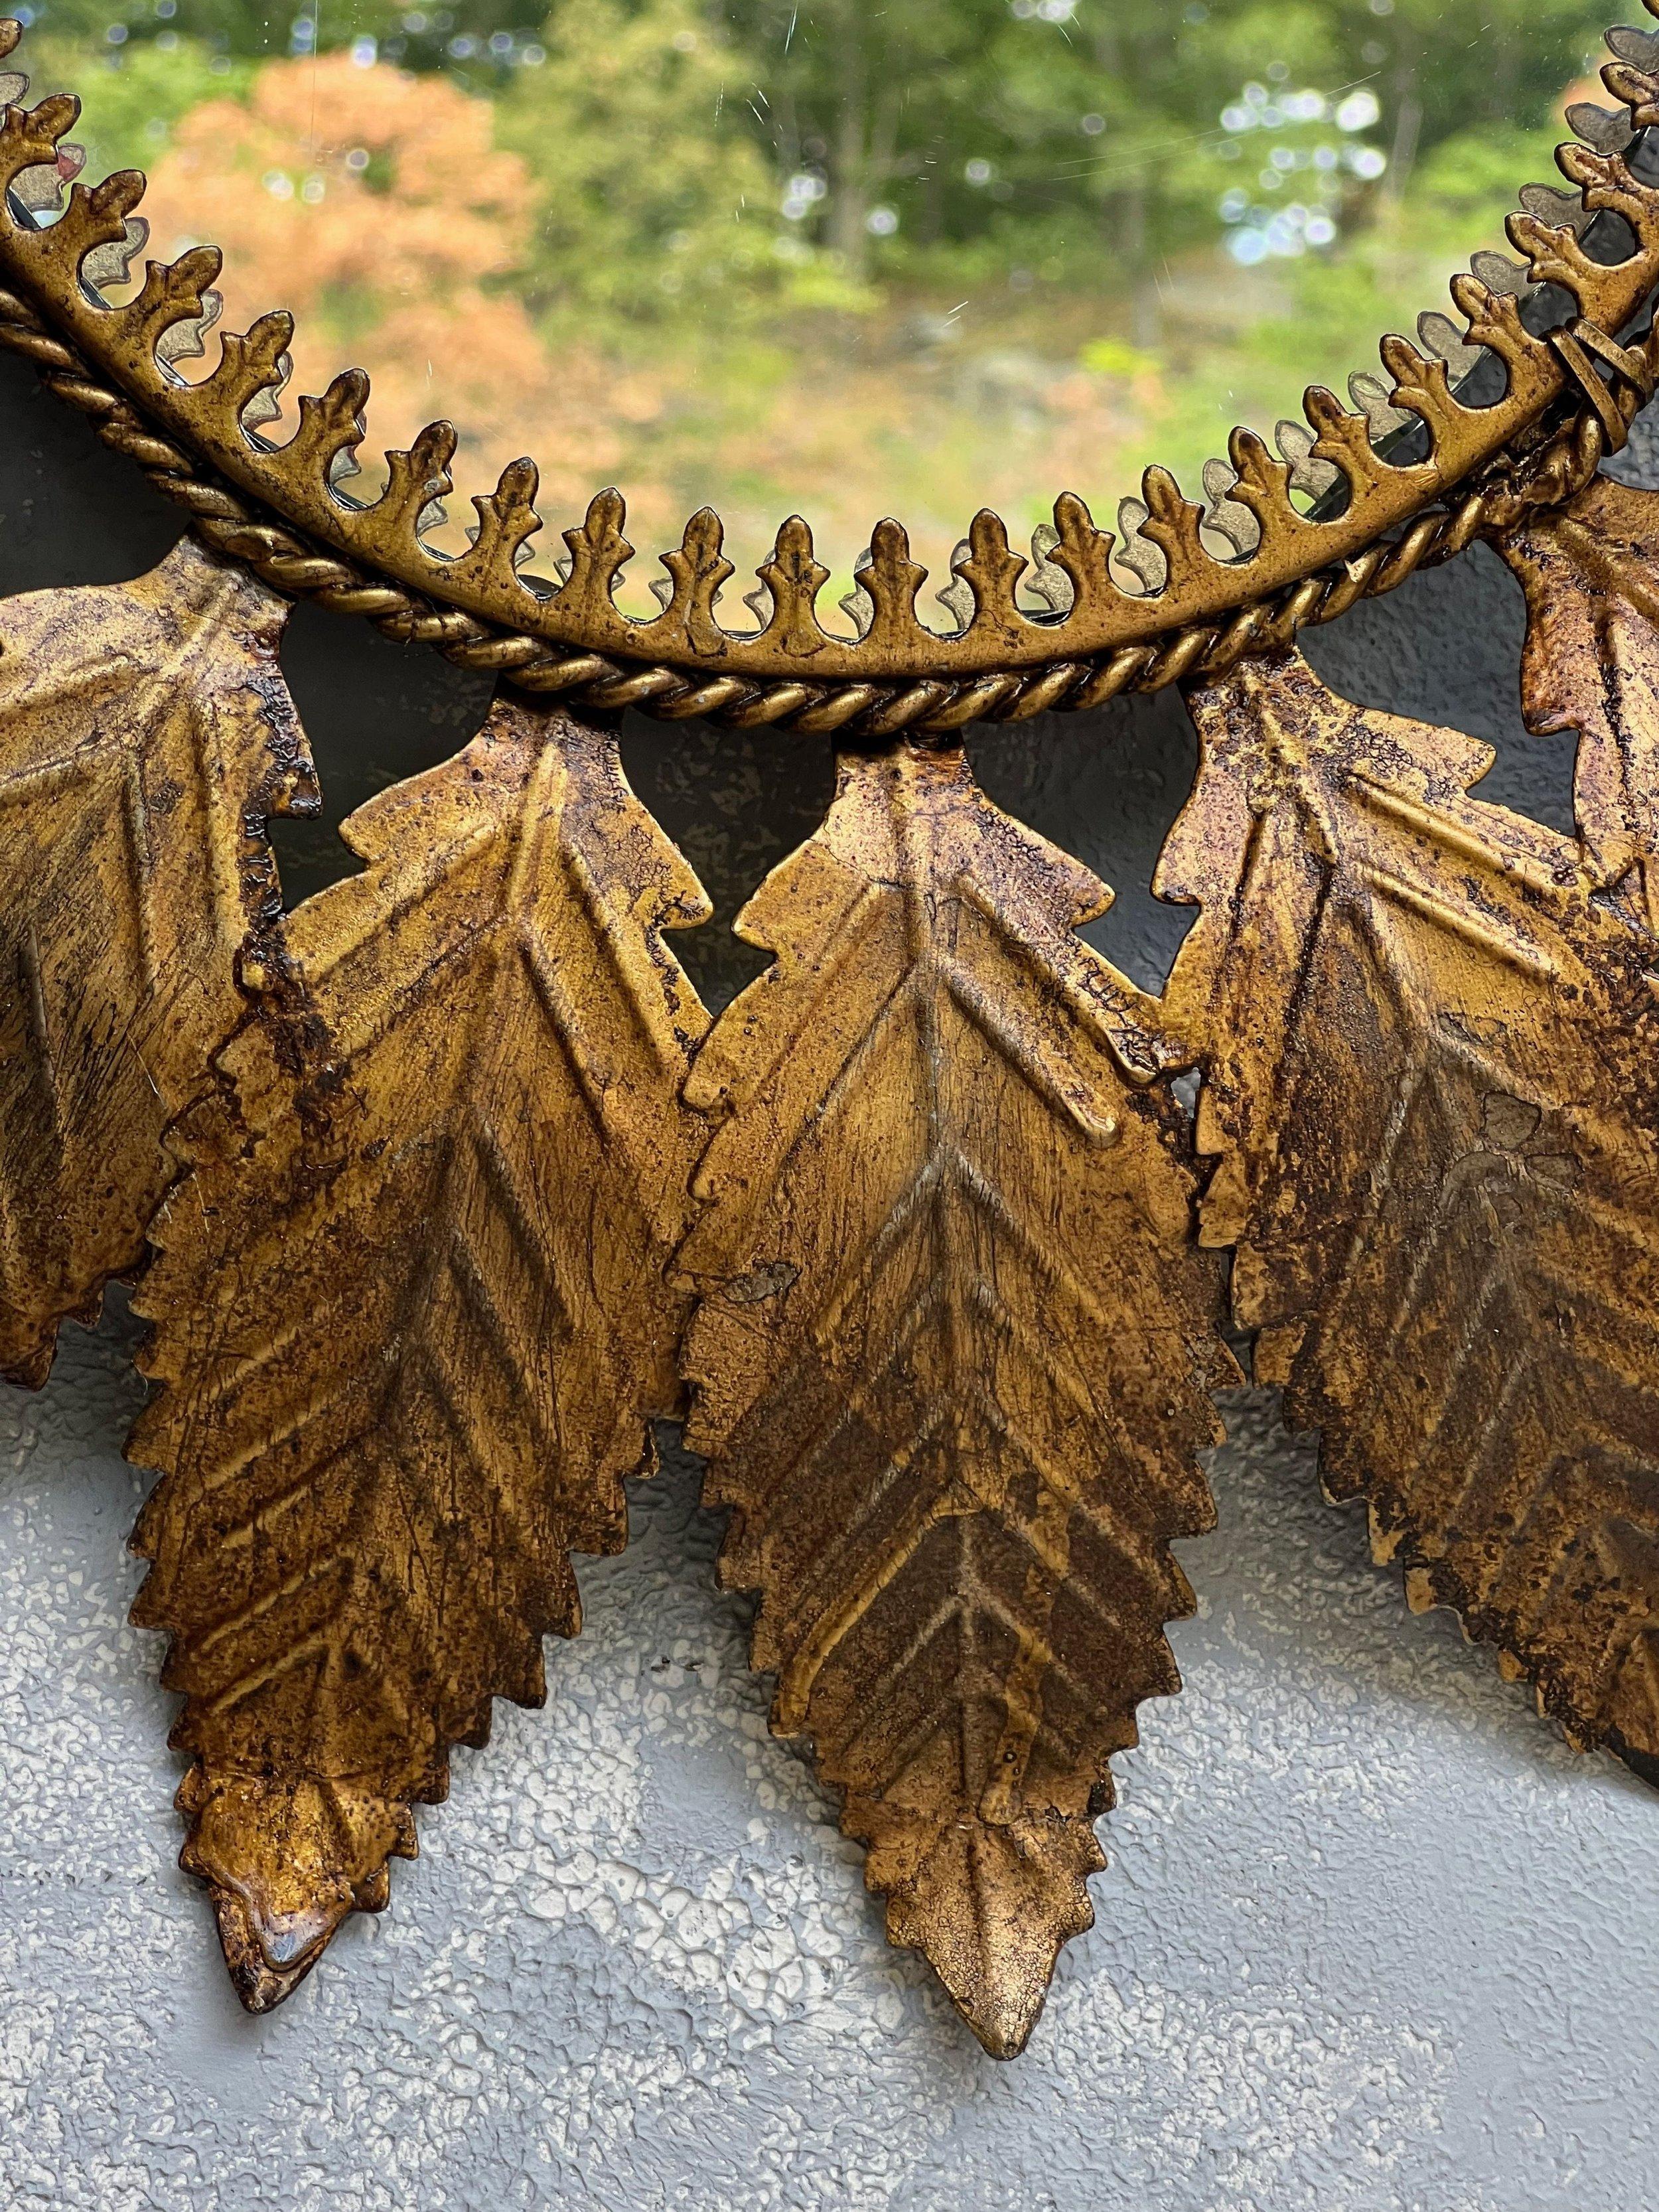 Mid-20th Century Spanish Oval Gilt Metal Sunburst Mirror With Curved Radiating Leaves For Sale